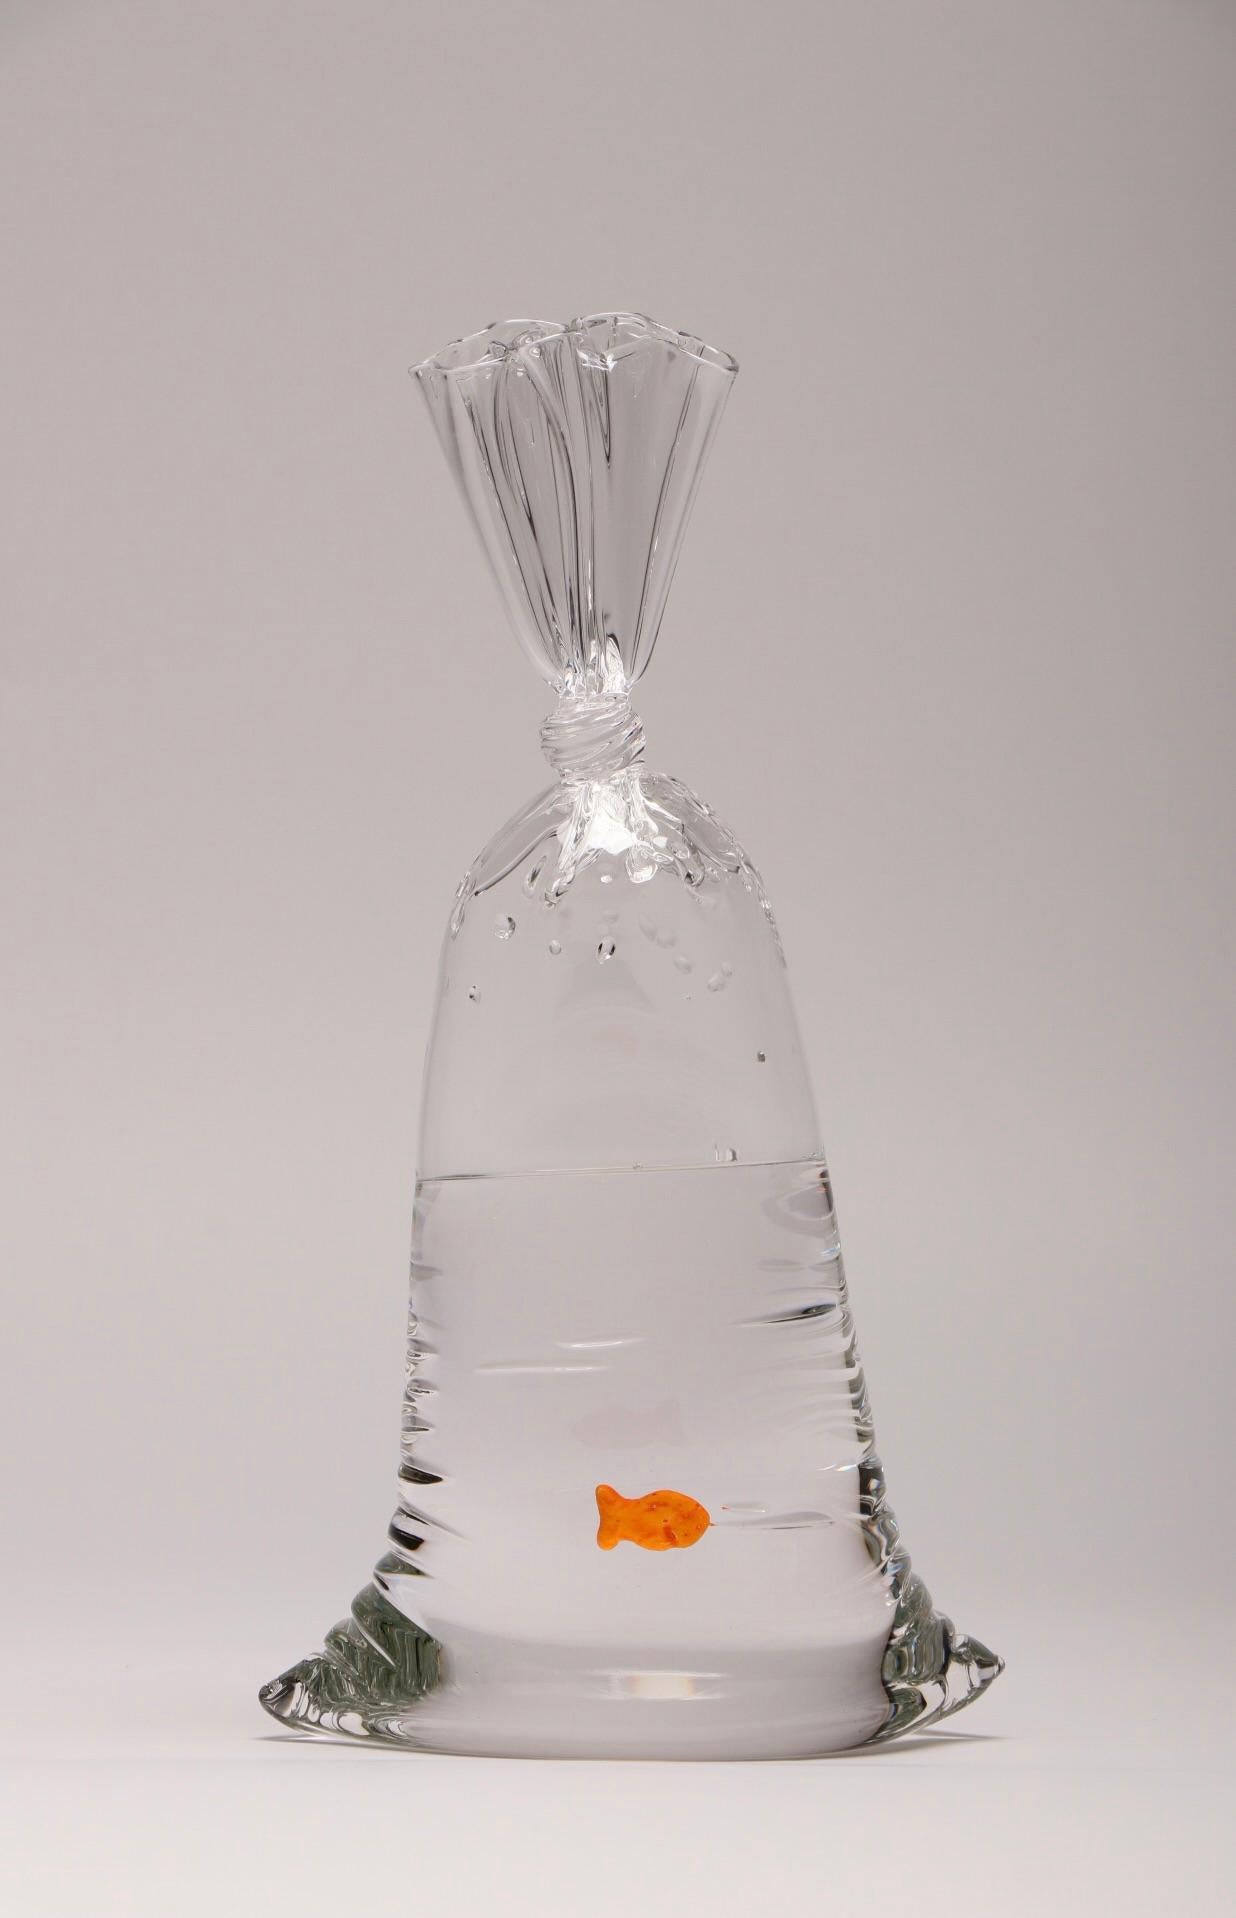 Limited Edition Small Glass Water Bag with Goldfish - Sculpture by Dylan Martinez